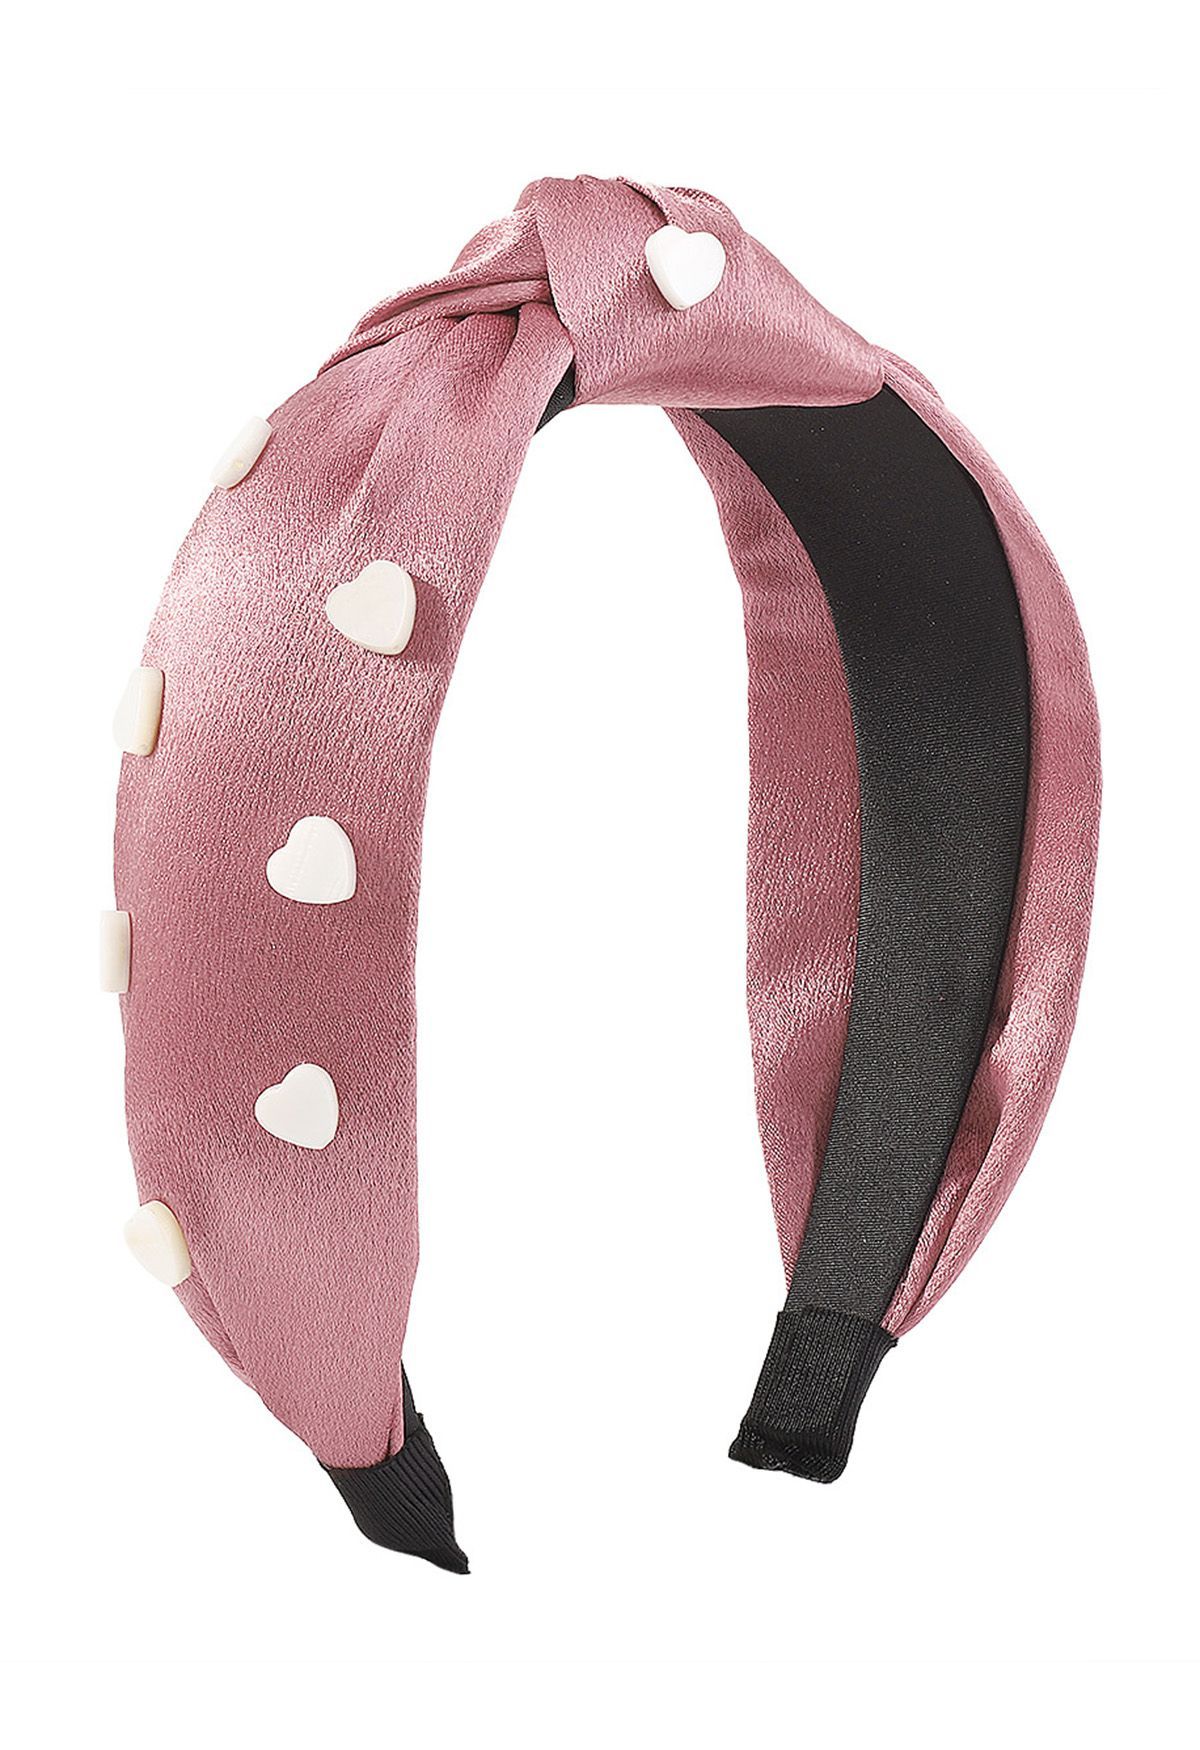 3D Heart Knotted Headband in Pink | Chicwish